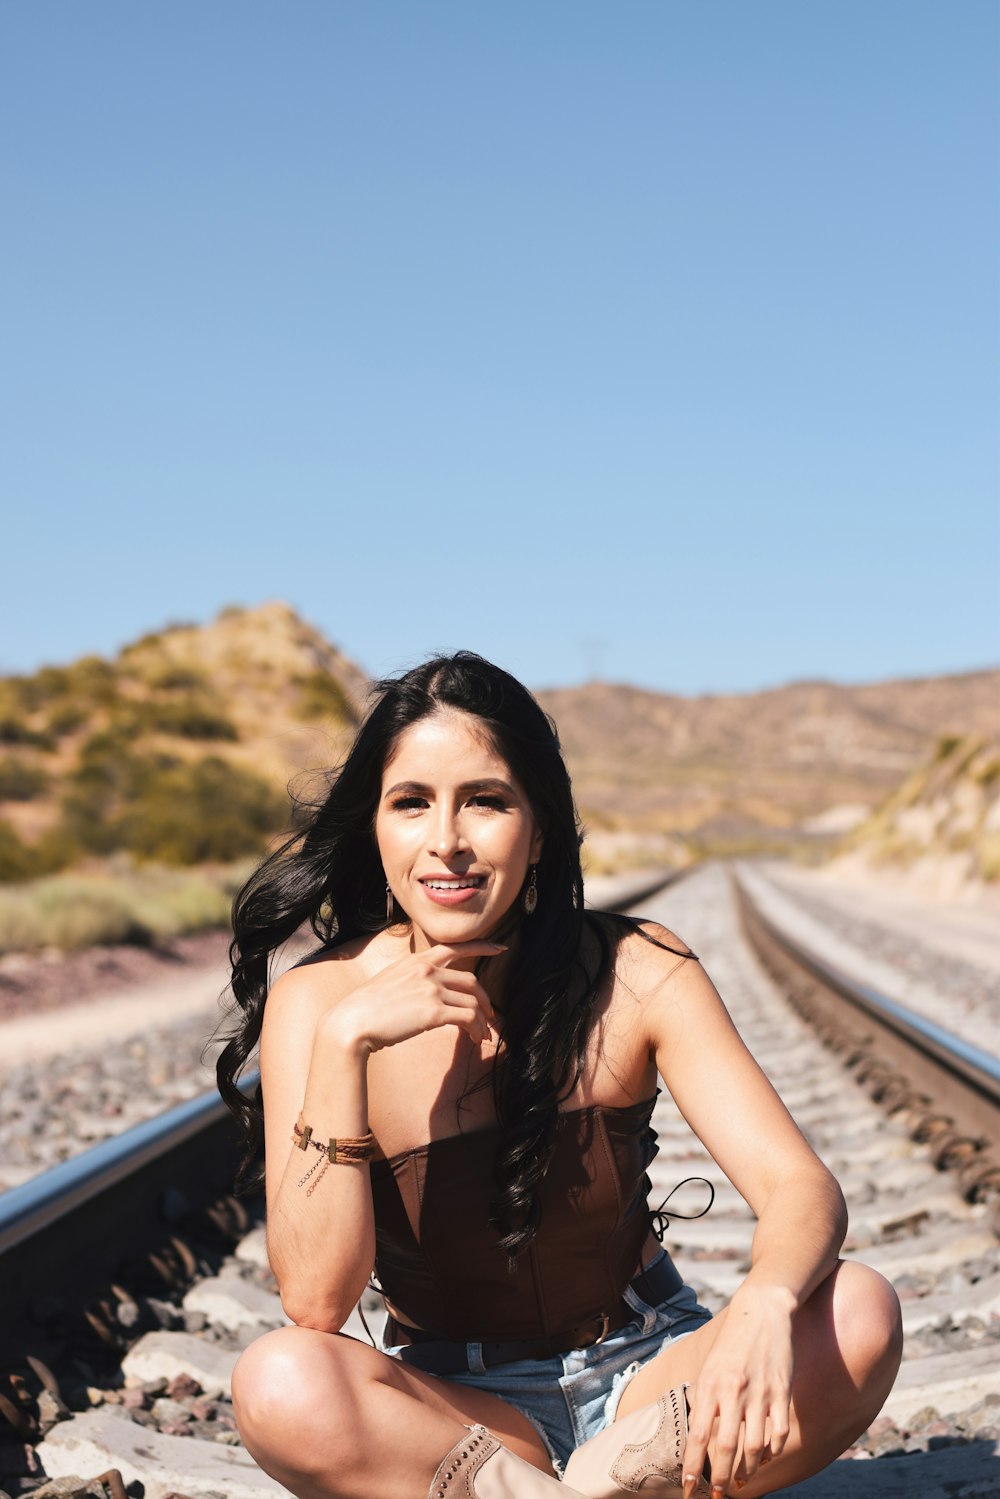 a woman sitting on a train track posing for a picture